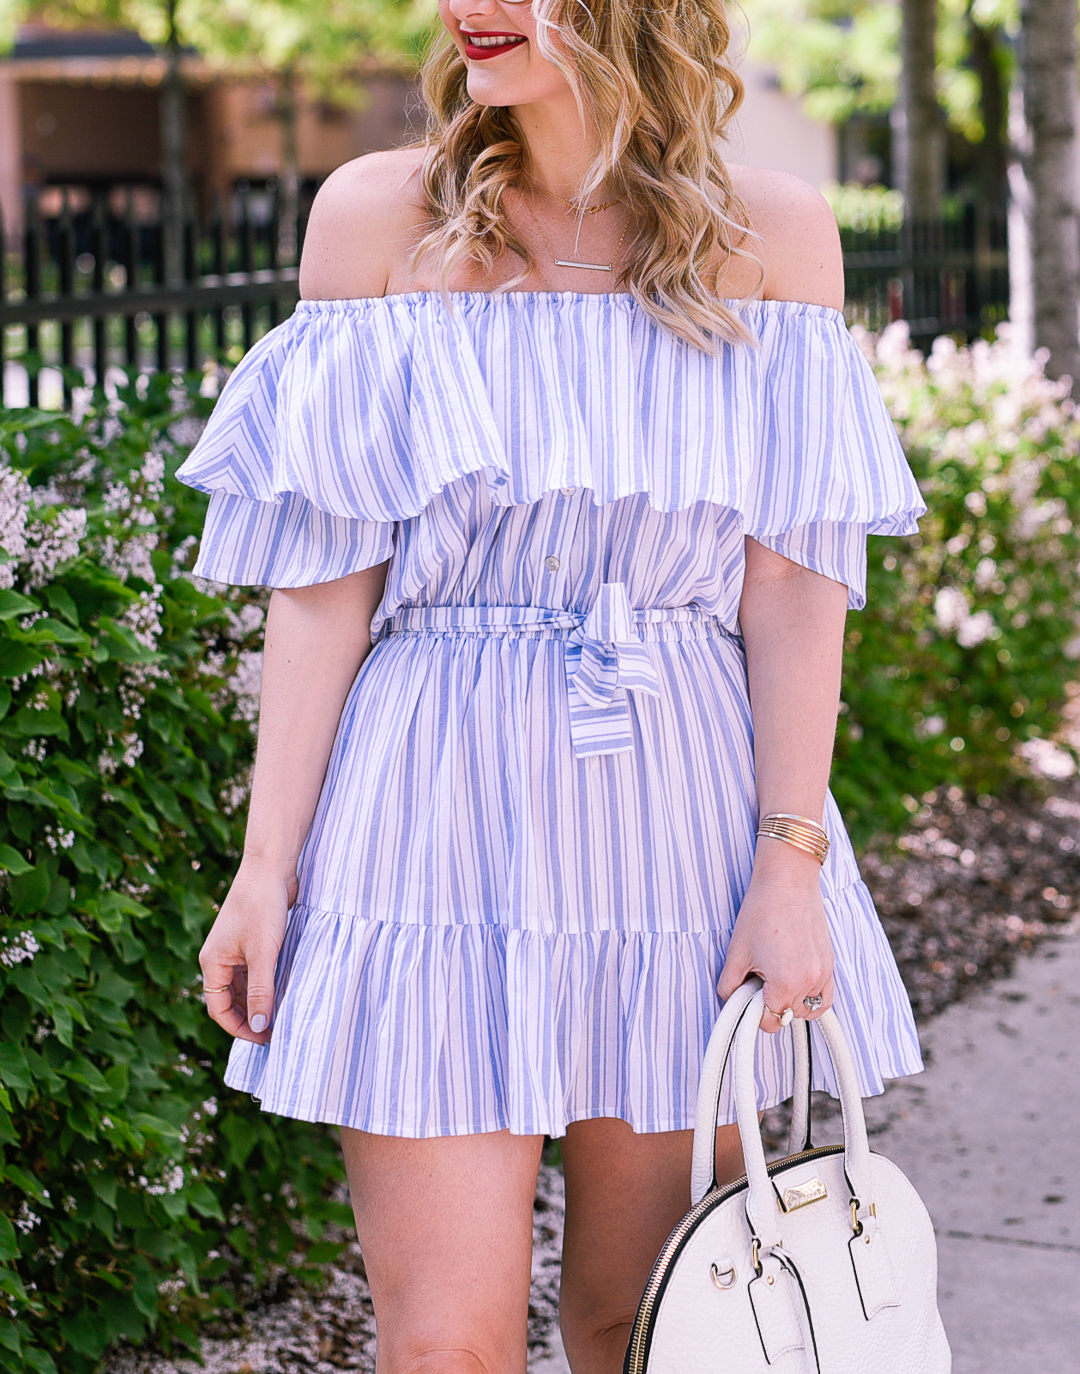 ruffled blue and white dress with a tie waist 